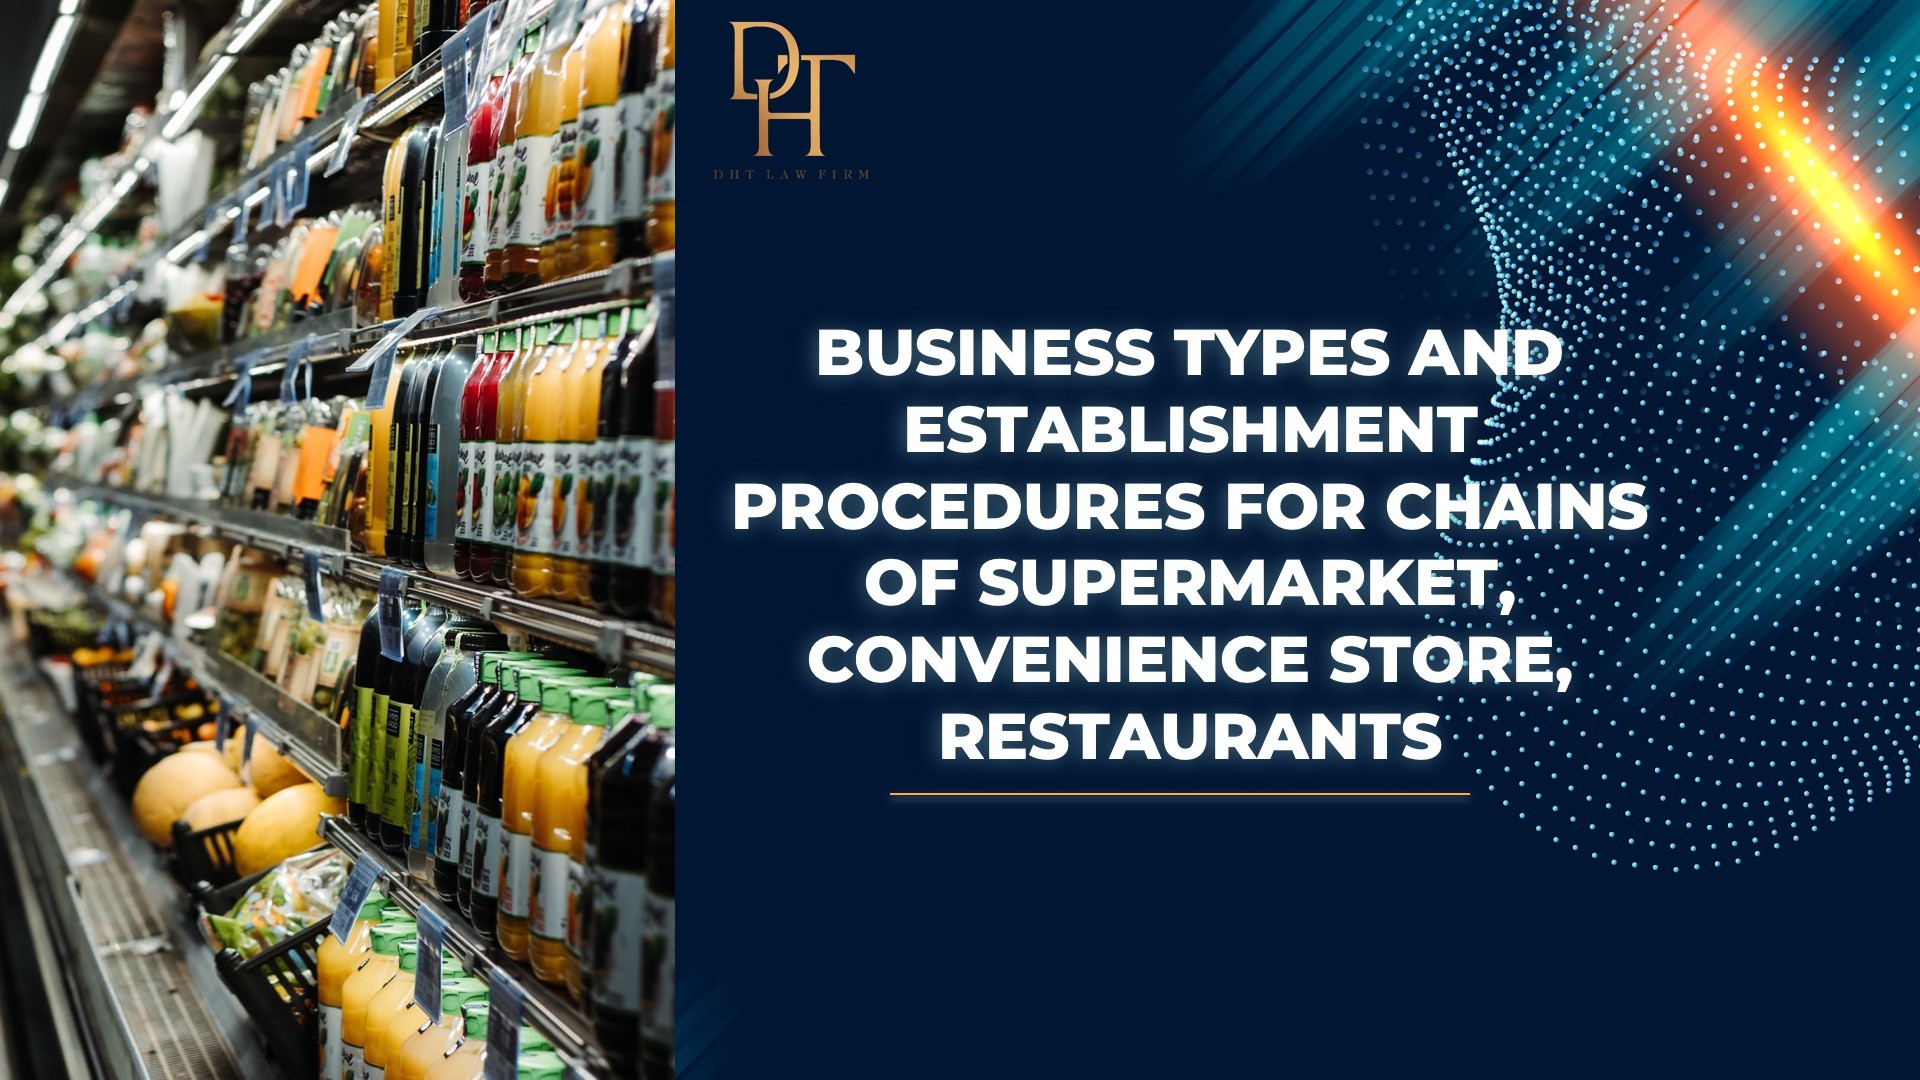 BUSINESS TYPES AND ESTABLISHMENT PROCEDURES FOR CHAINS OF SUPERMARKETS, CONVENIENCE STORES, RESTAURANTS